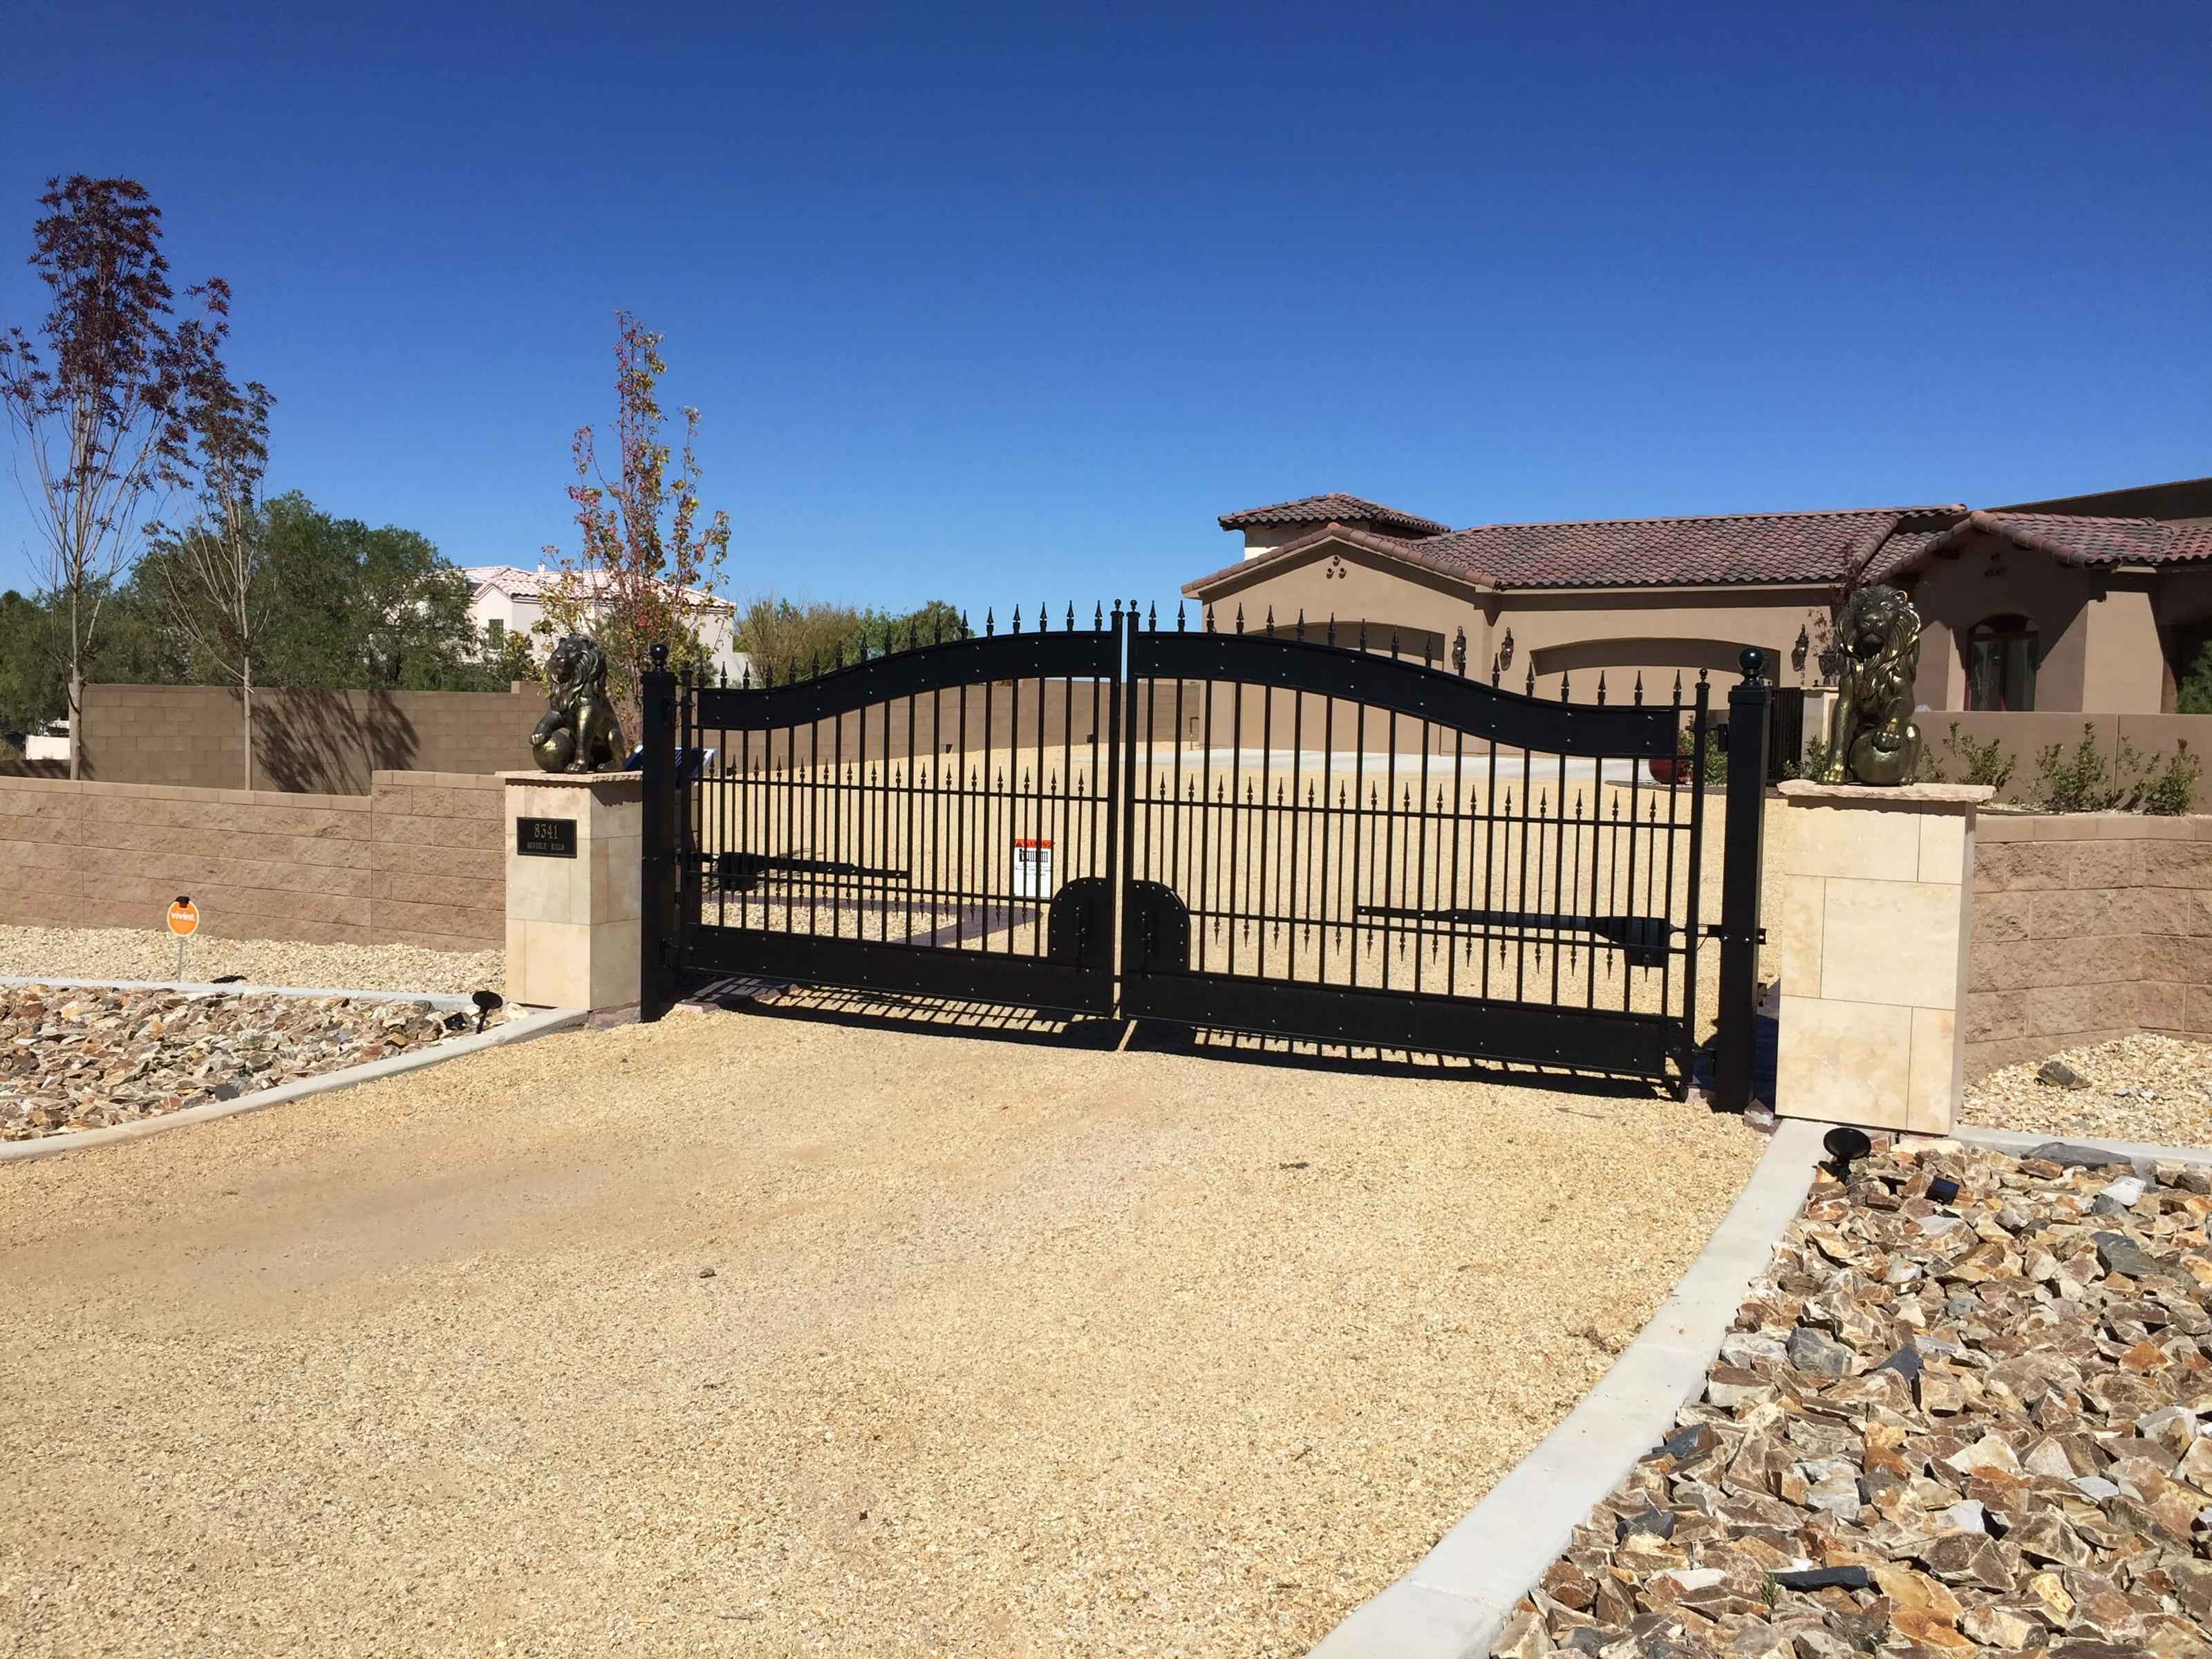 Black double wrought iron gate with heavy solid bands top and botton. Arched with rivets on bands. Gate is on gravel driveway between sandstone pillars. in a concrete block wall.